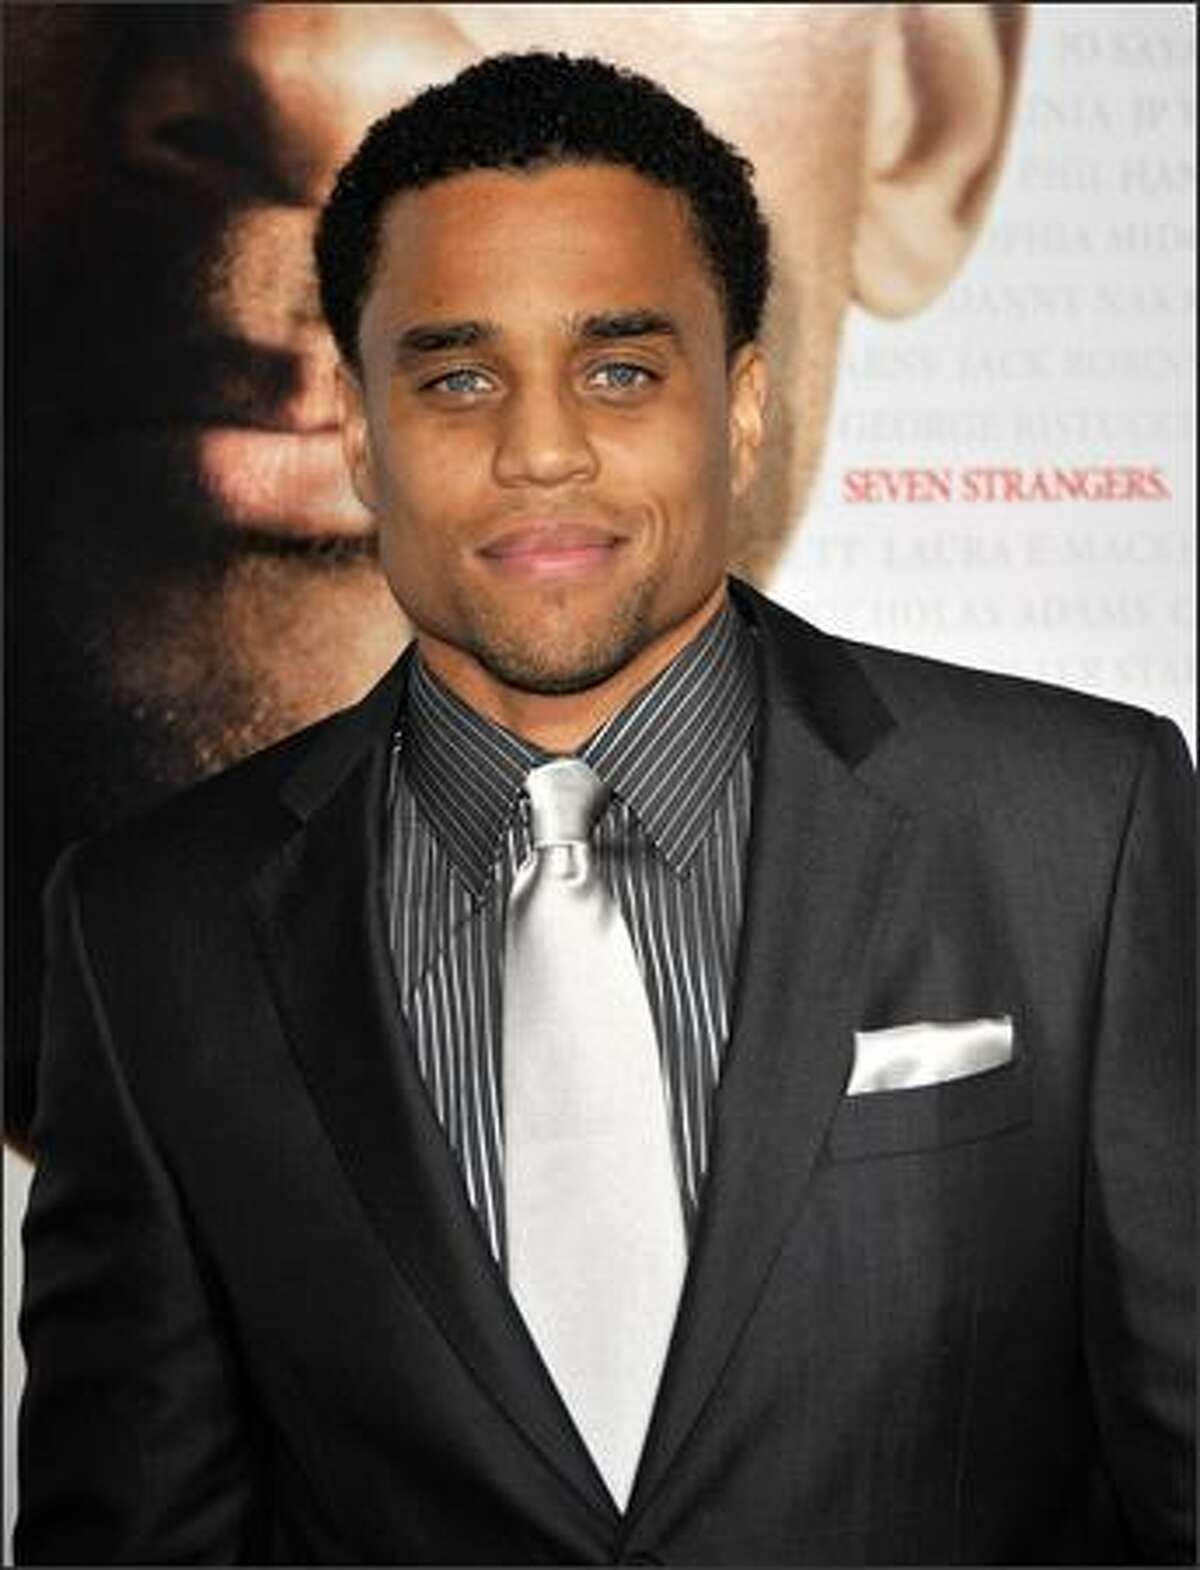 Actor Michael Ealy arrives at the premiere of Columbia Pictures' "Seven Pounds" held at Mann's Village Theatre on Tuesday in Westwood, Calif.